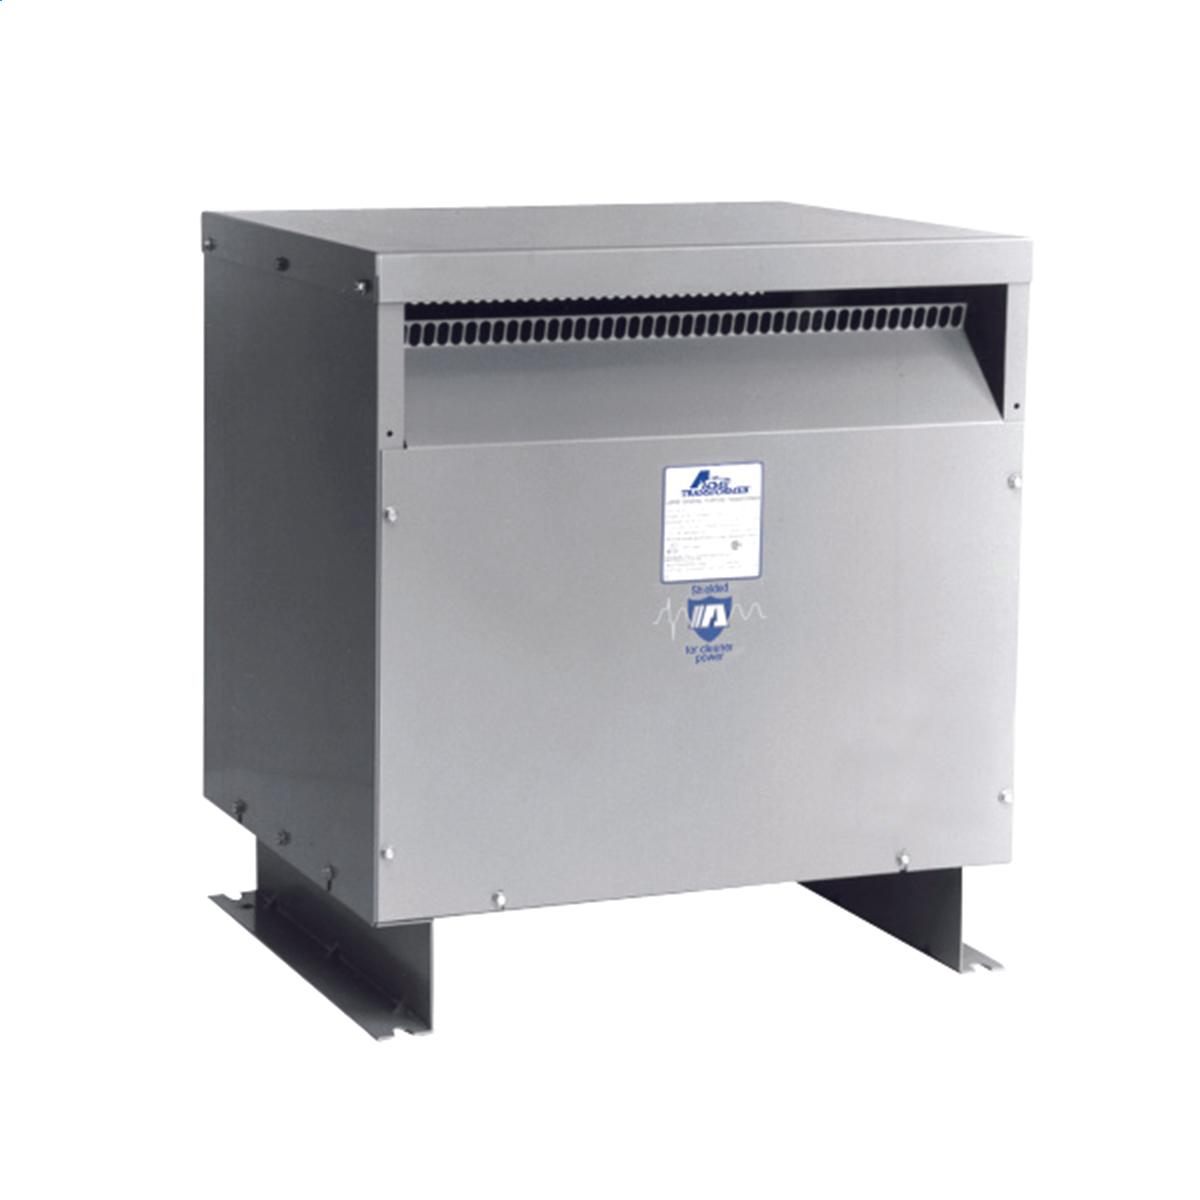 Hubbell WI045K14 Medium Voltage Transformer - Three Phase, 2400Δ - 600ΔV, 45kVA  ; Lower operating cost over Liquid-filled ; No additional fireproofing or venting ; Long life expectancy ; Smaller, lighter easy to maintain